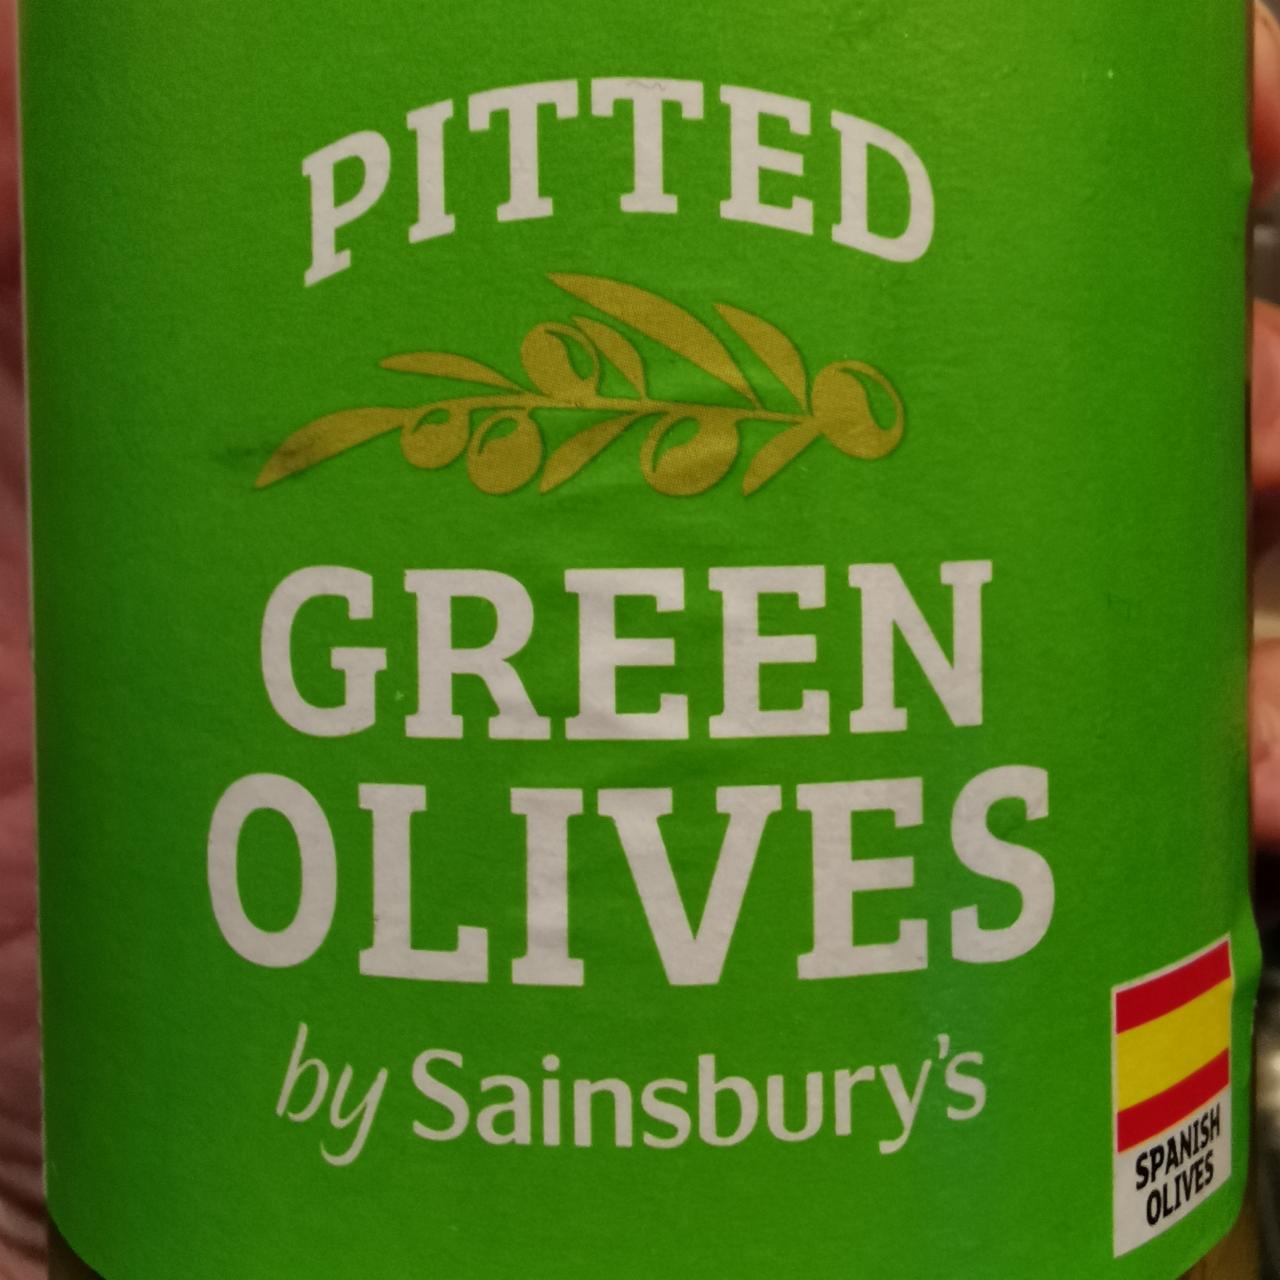 Fotografie - Pitted Green Olives by Sainsbury's